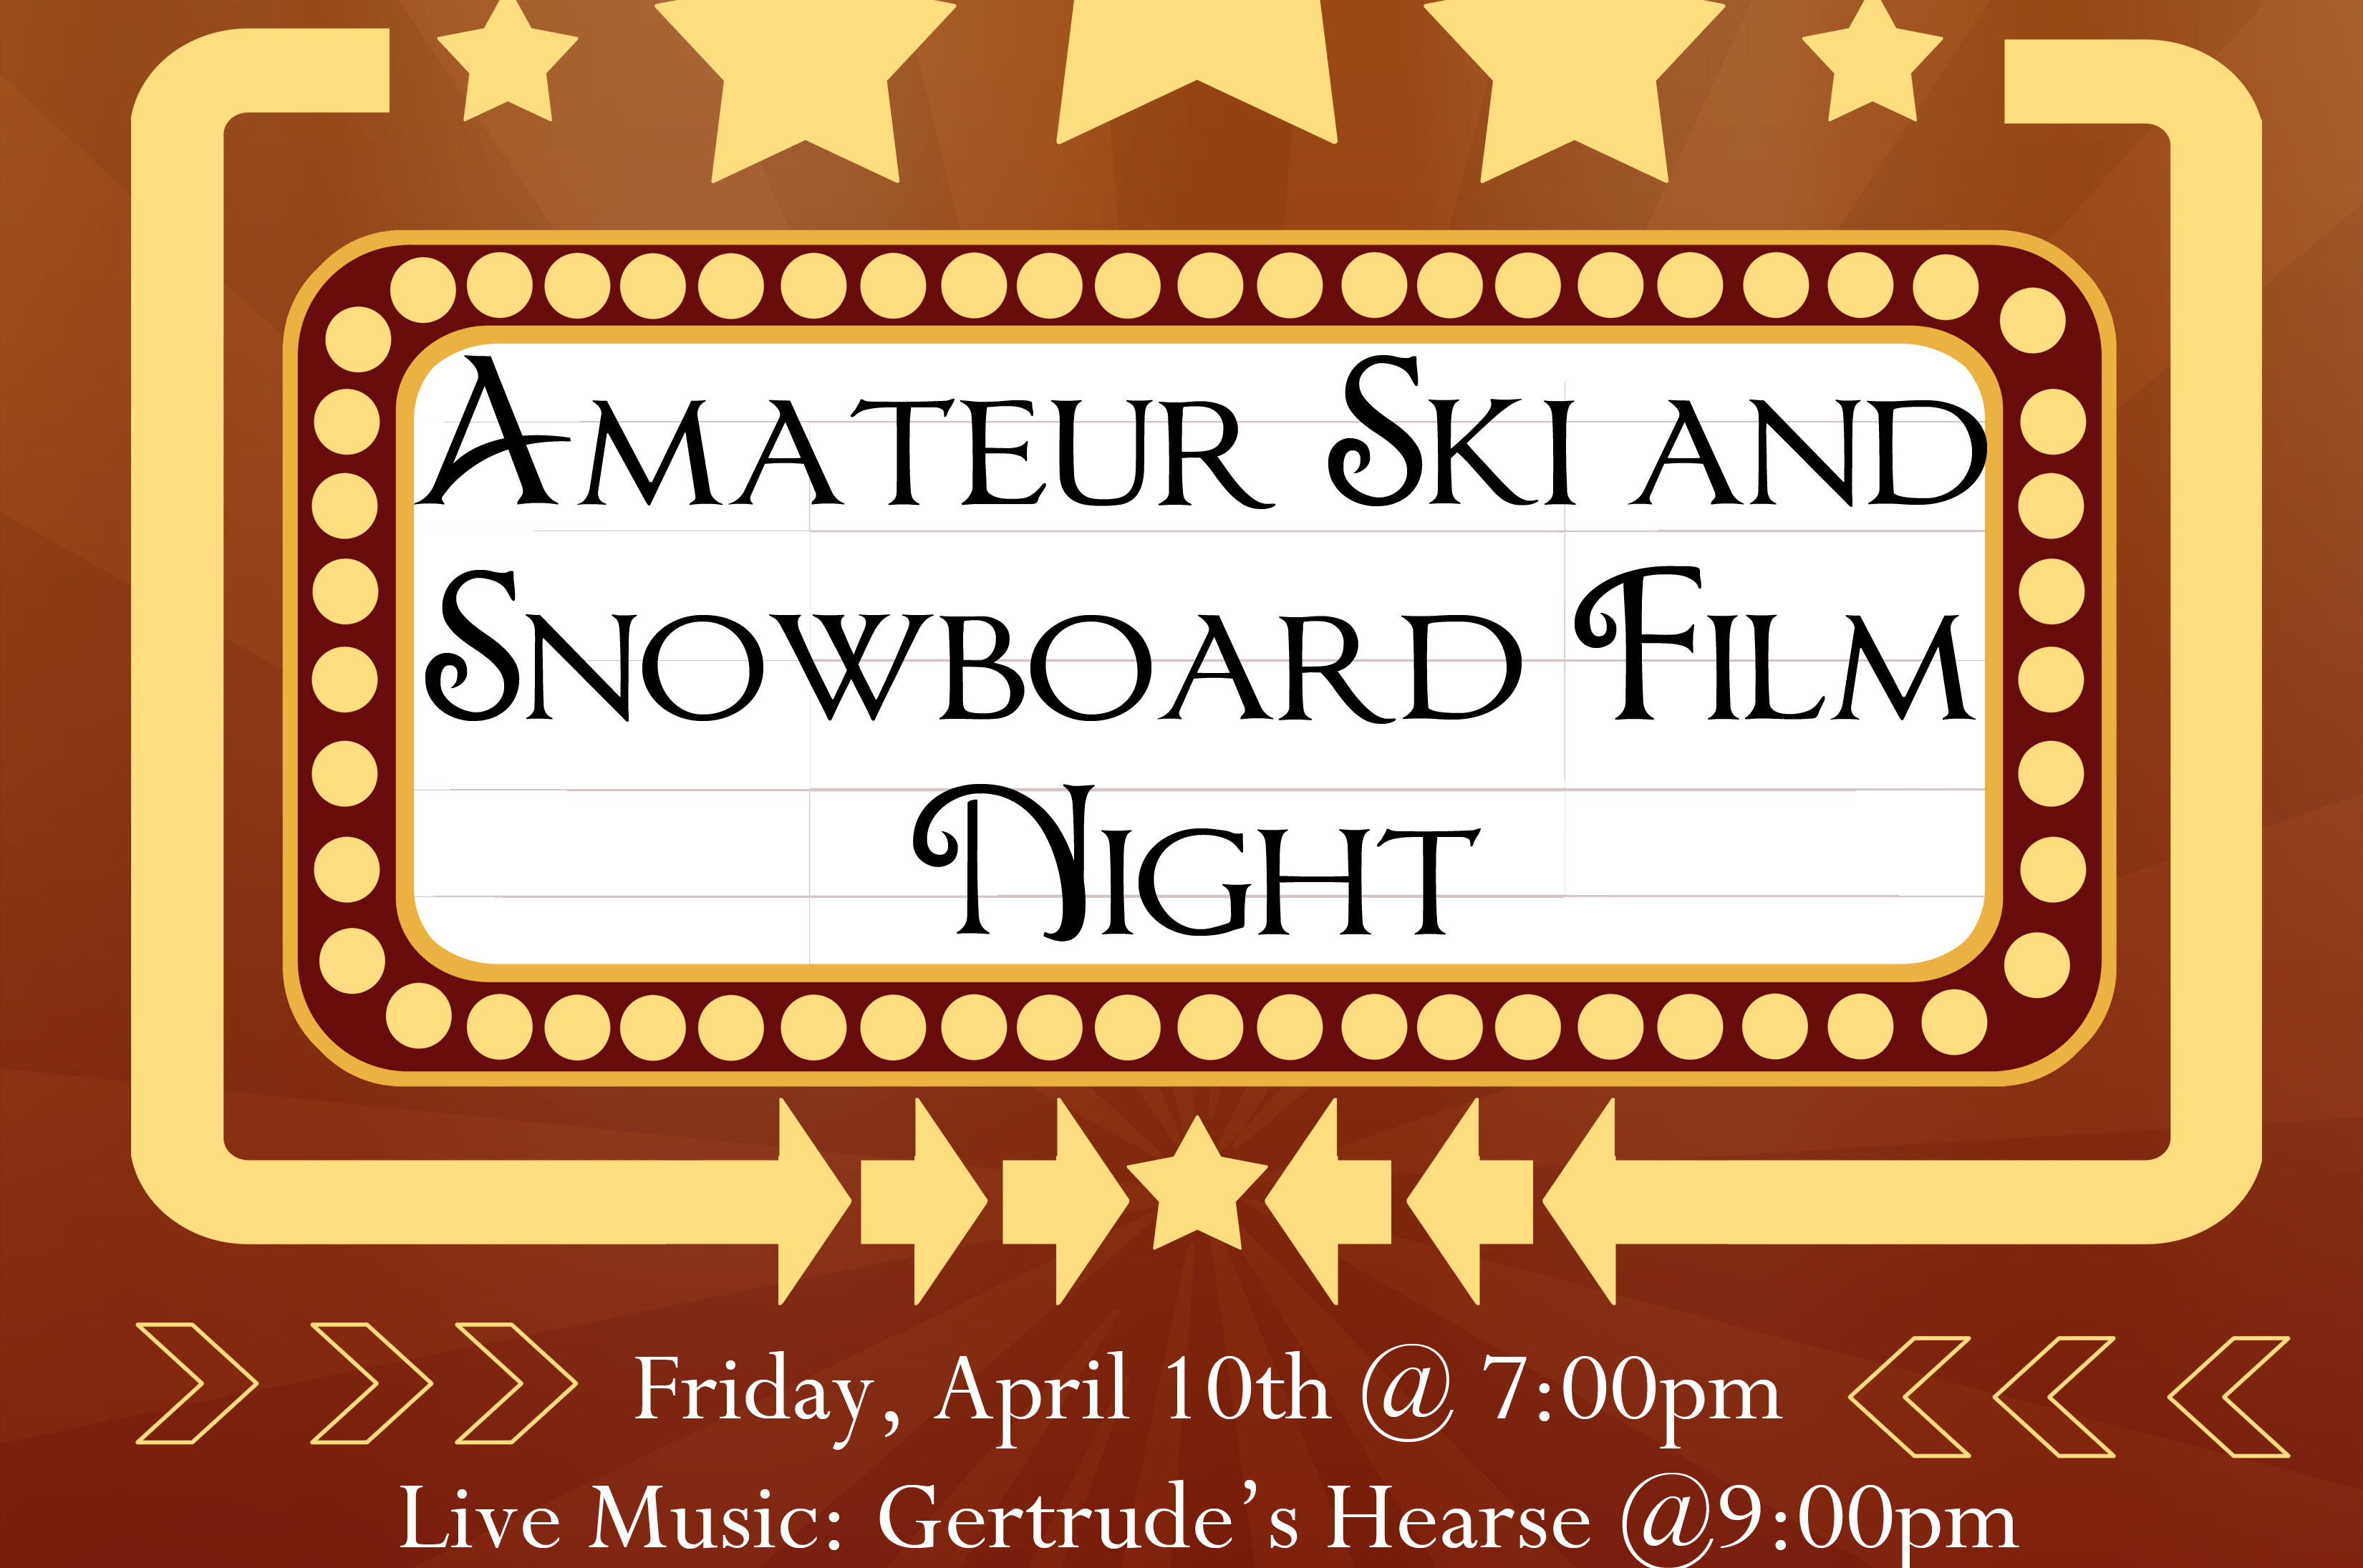 2020 Amateur Ski and Snowboard Film Night — Crystal Mountain Hotels